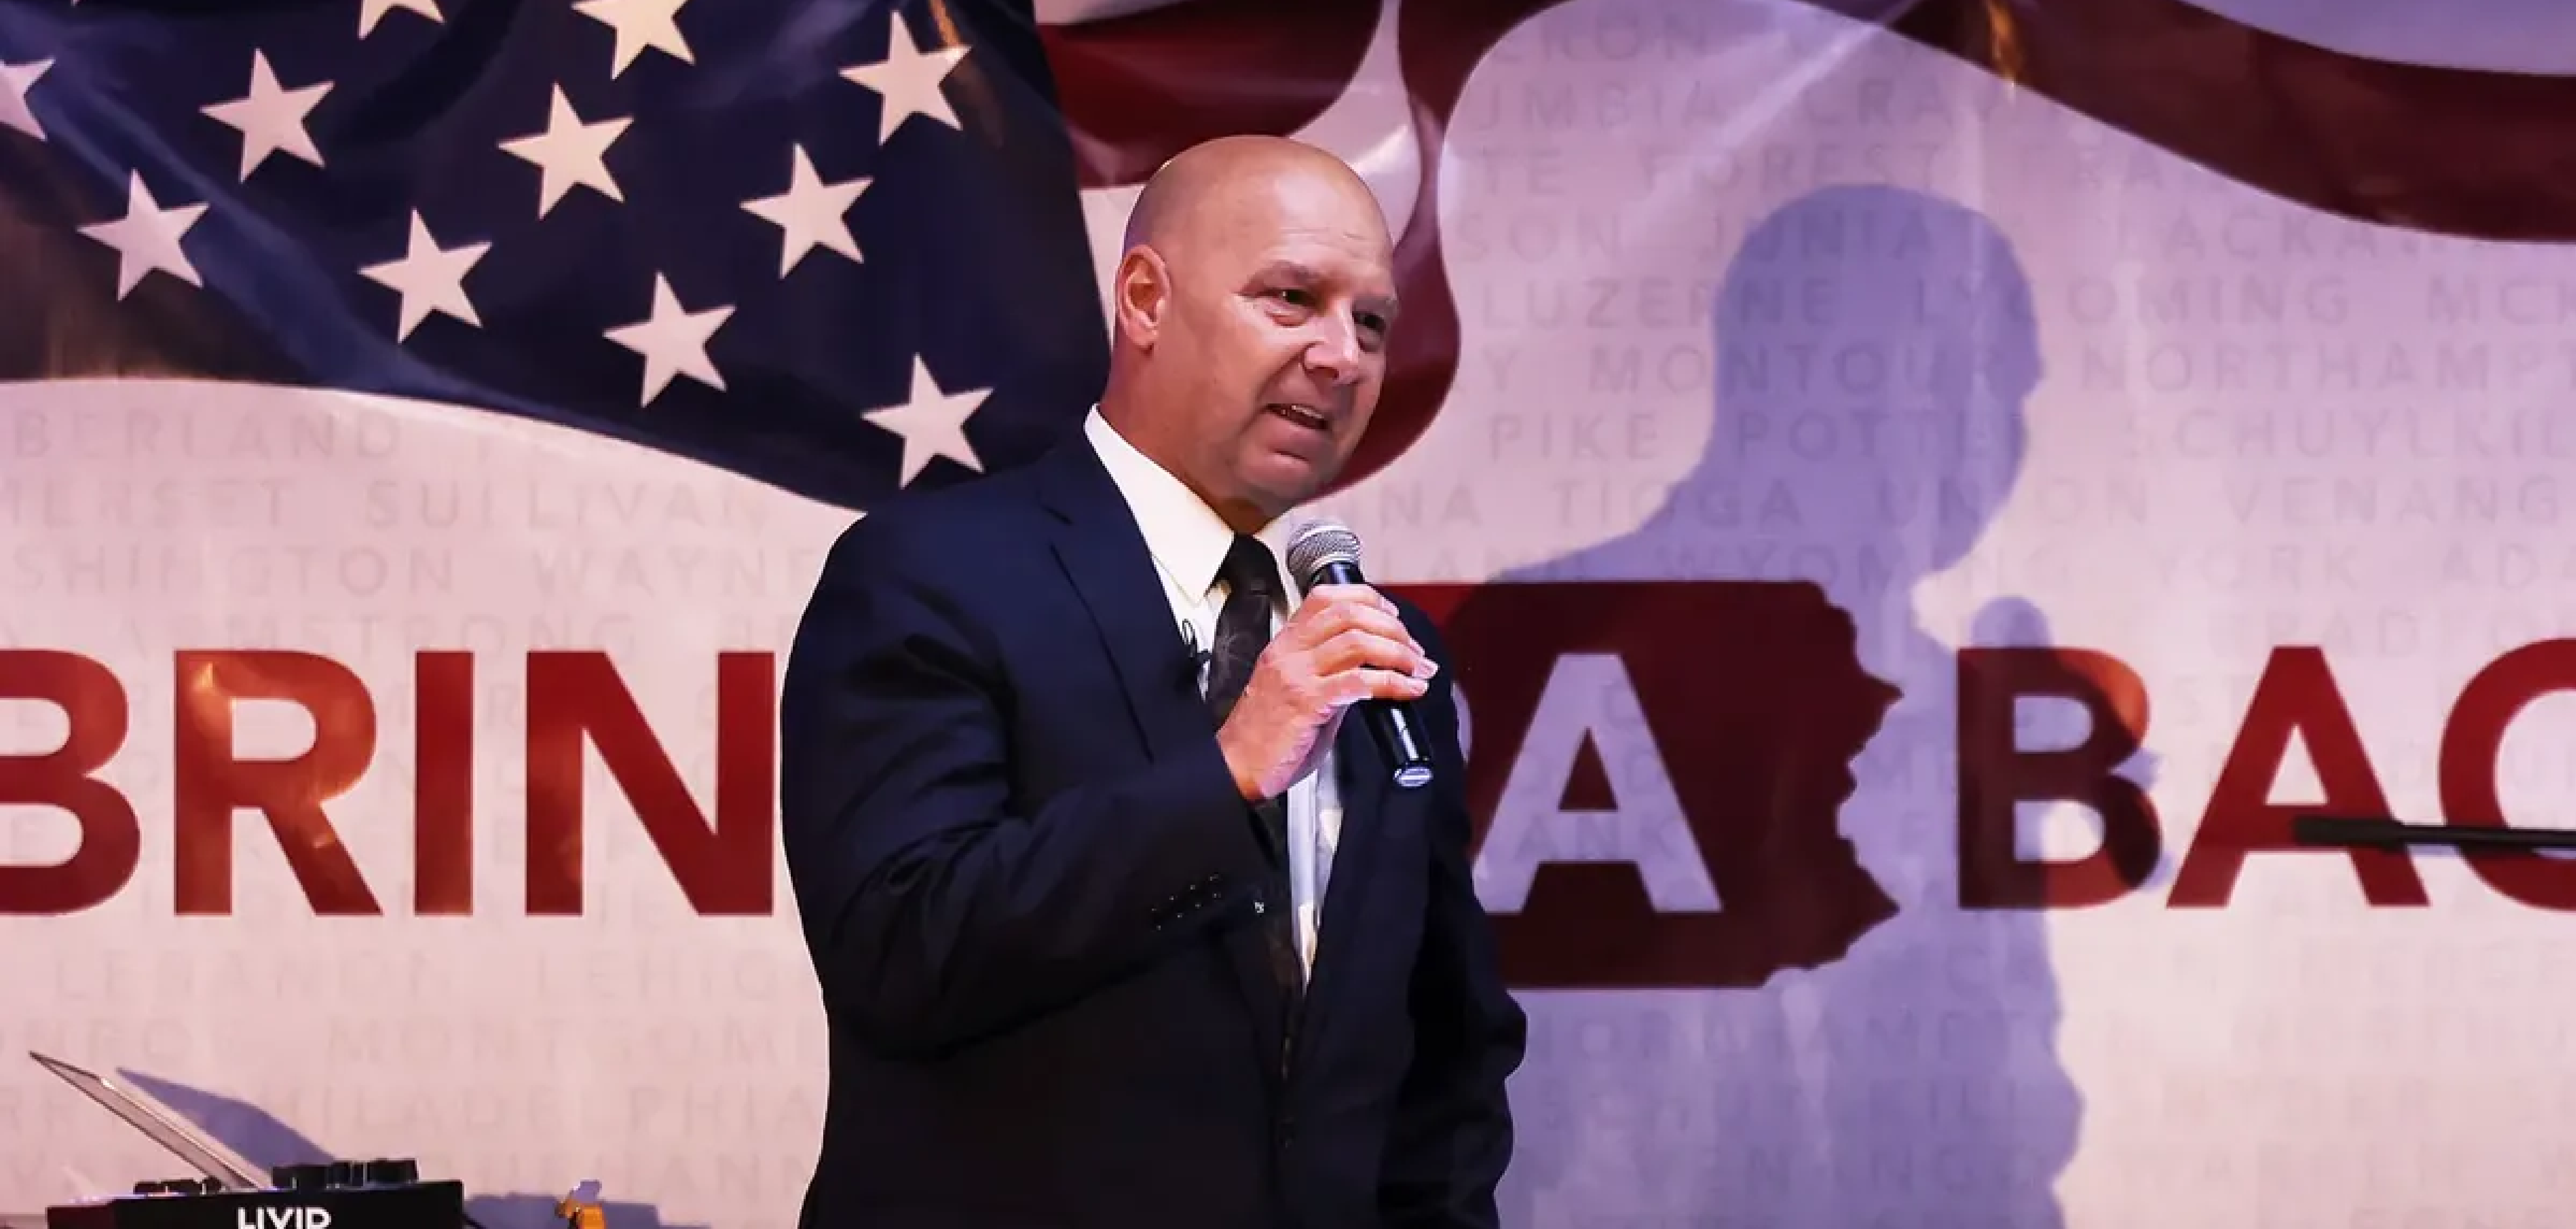 A bald man in a suit, standing in front of an American flag, talking into a mic.